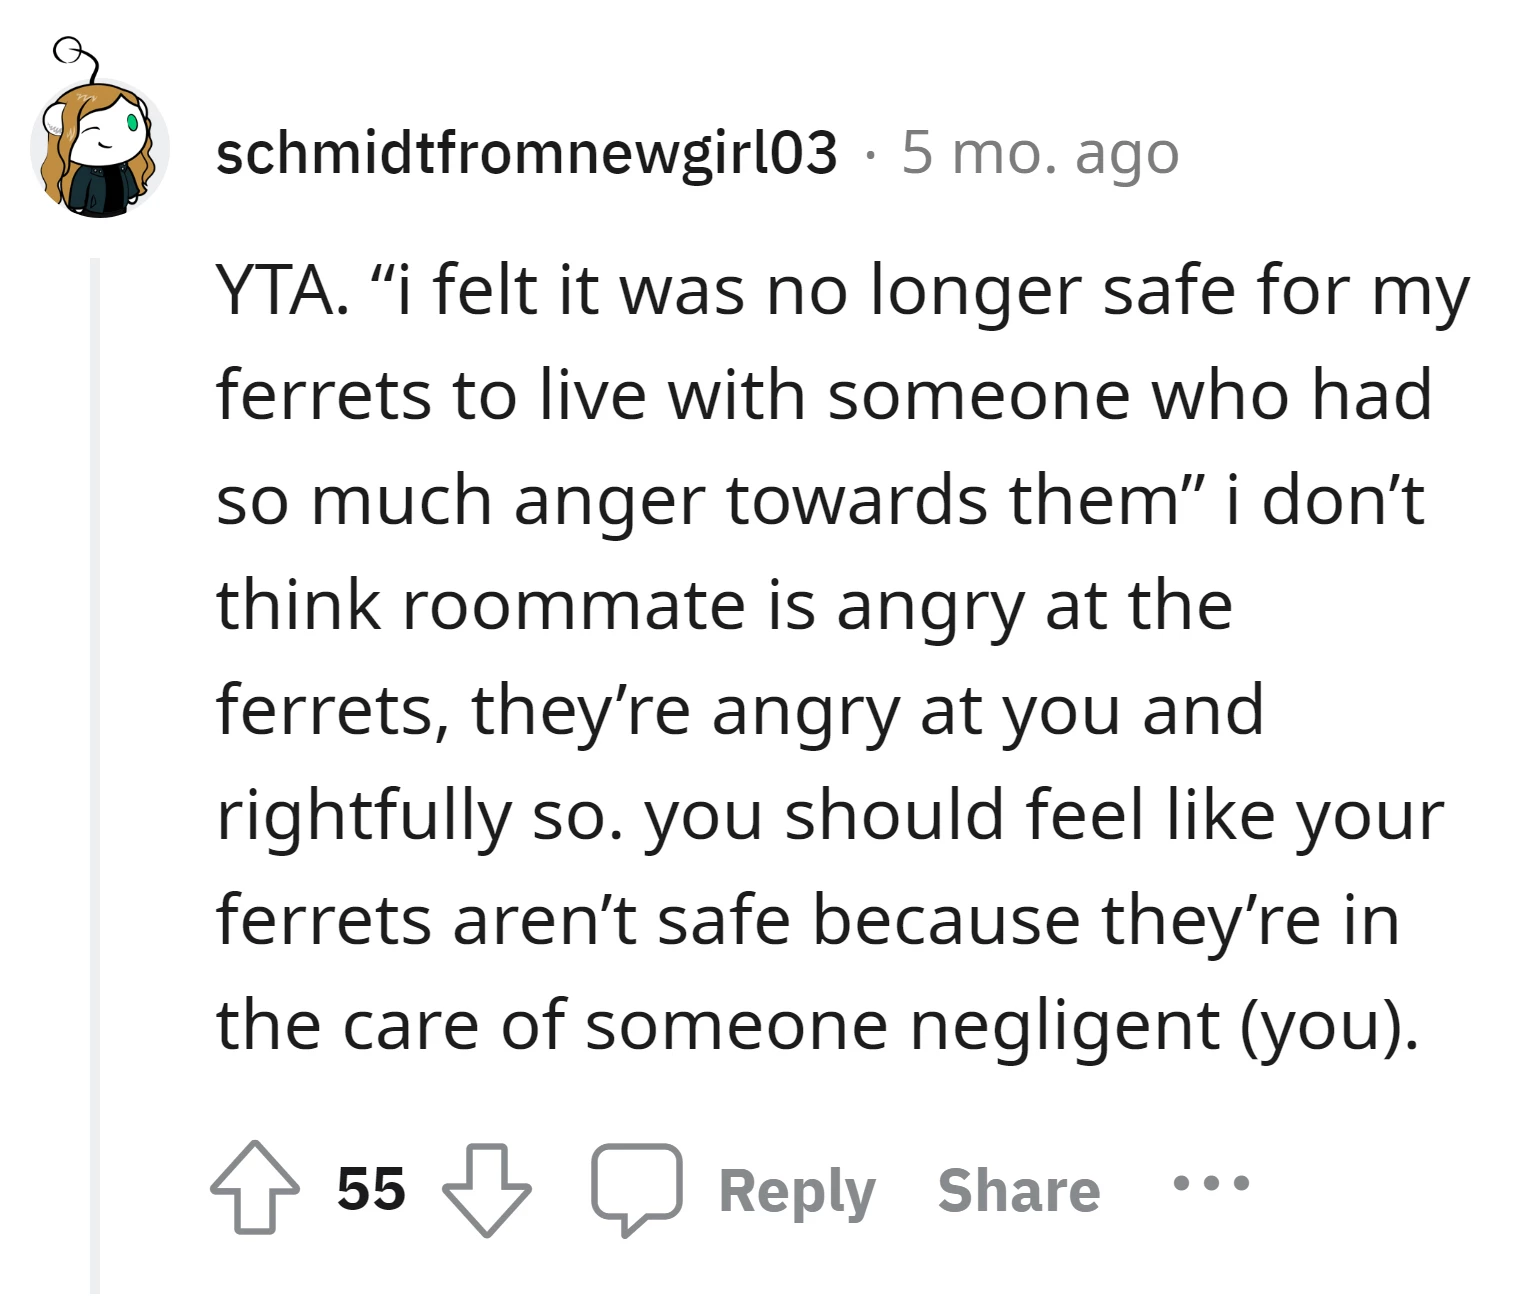 The roommate's anger is rightfully directed at the OP for negligence